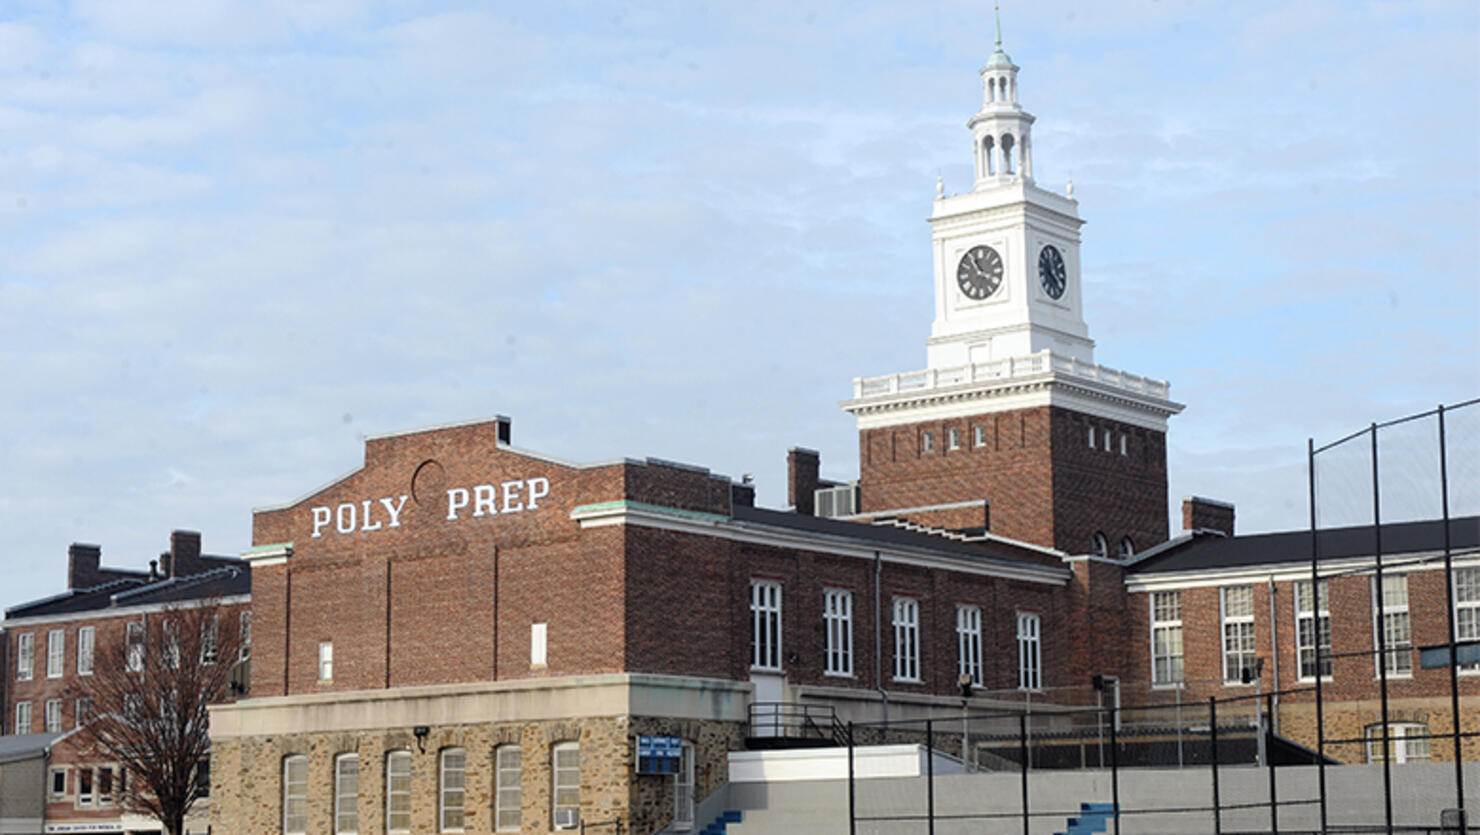 Poly Prep Country Day School at 9216 Seventh Ave., Brooklyn and its famed clock tower